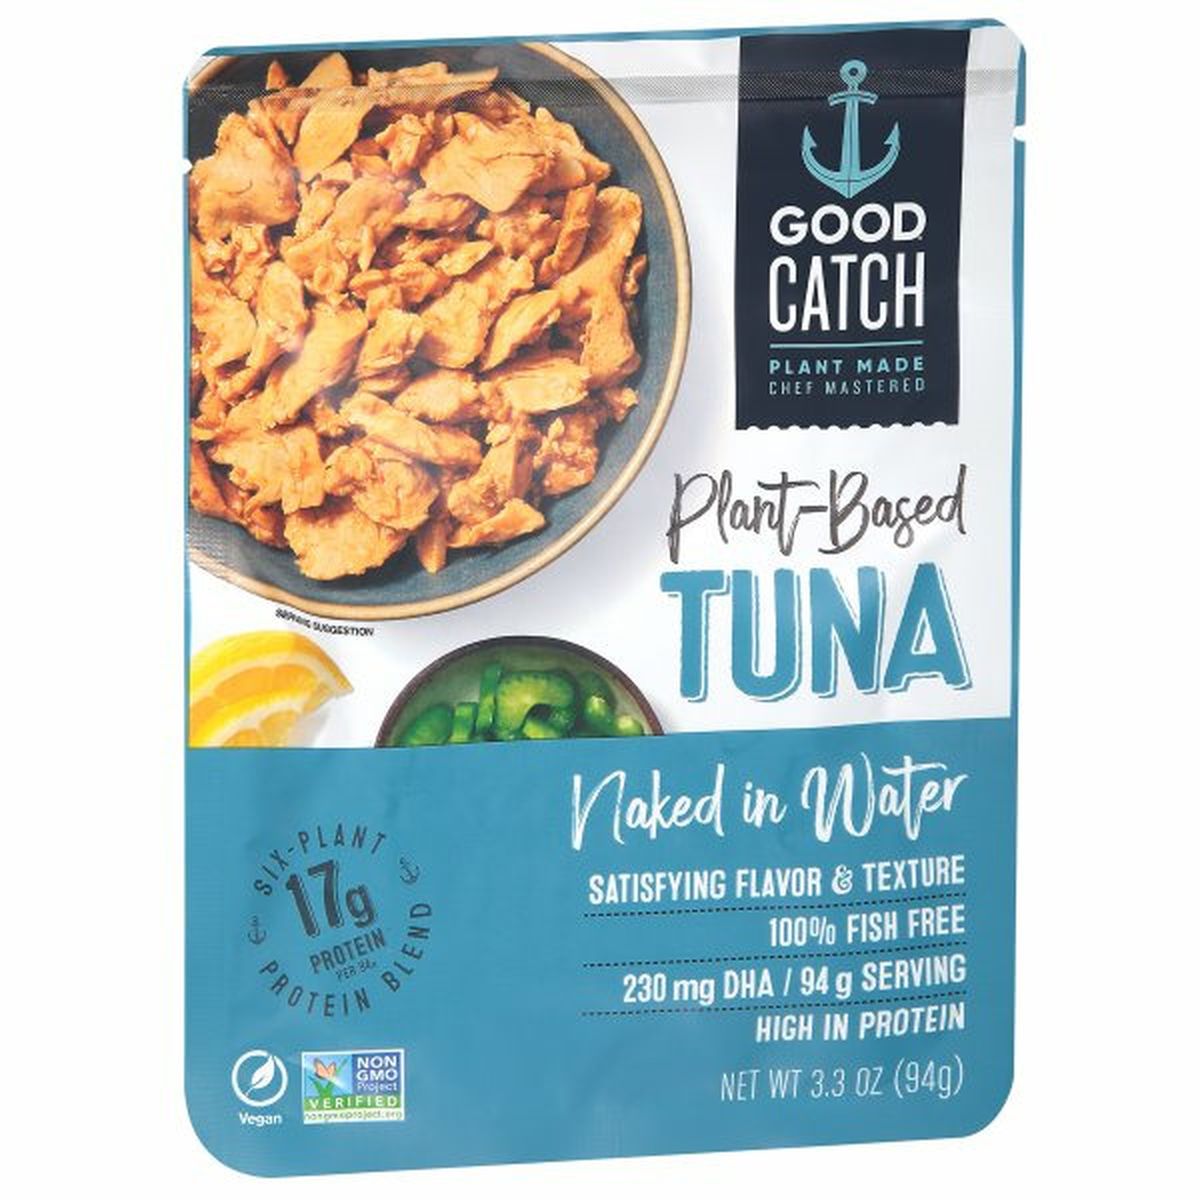 Calories in Good Catch Tuna, Naked in Water, Plant-Based